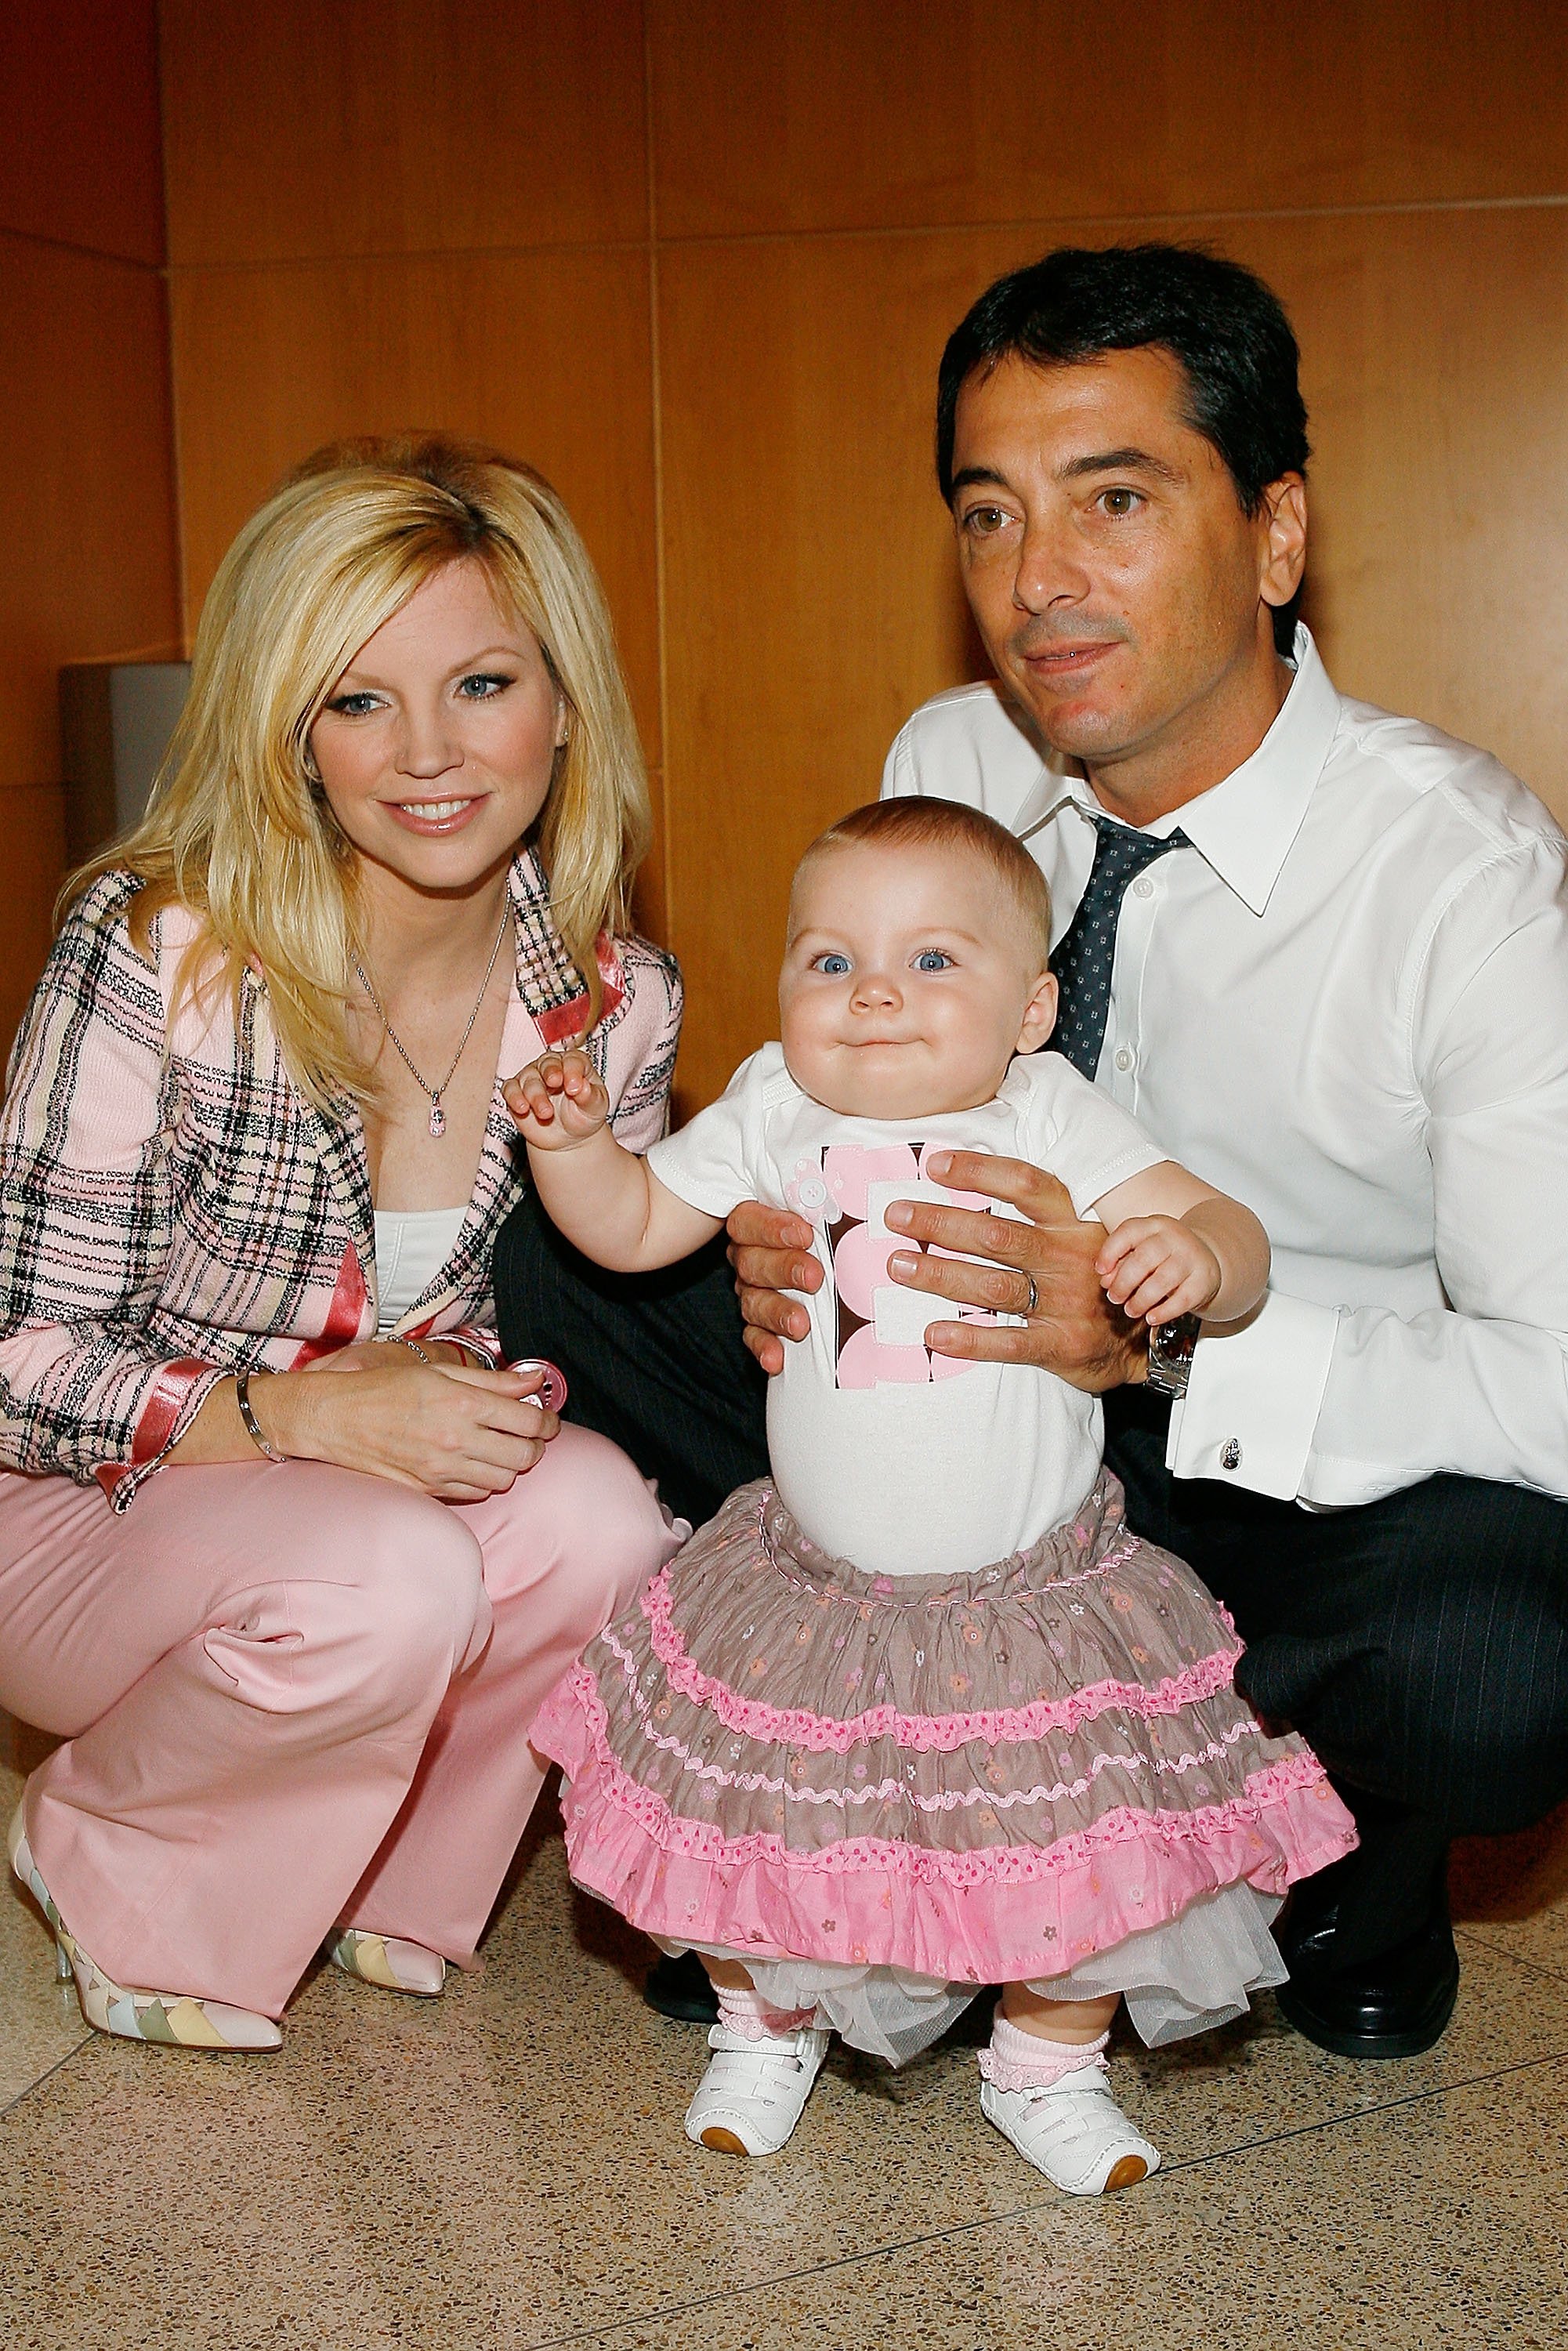 Scott Baio and Renee Baio pose with their daughter Bailey at a press conference to kickoff the National Newborn Screening Awareness Month on September 5, 2008 at the Mattell Children's Hospital UCLA in Westwood, California | Source: Getty Images 